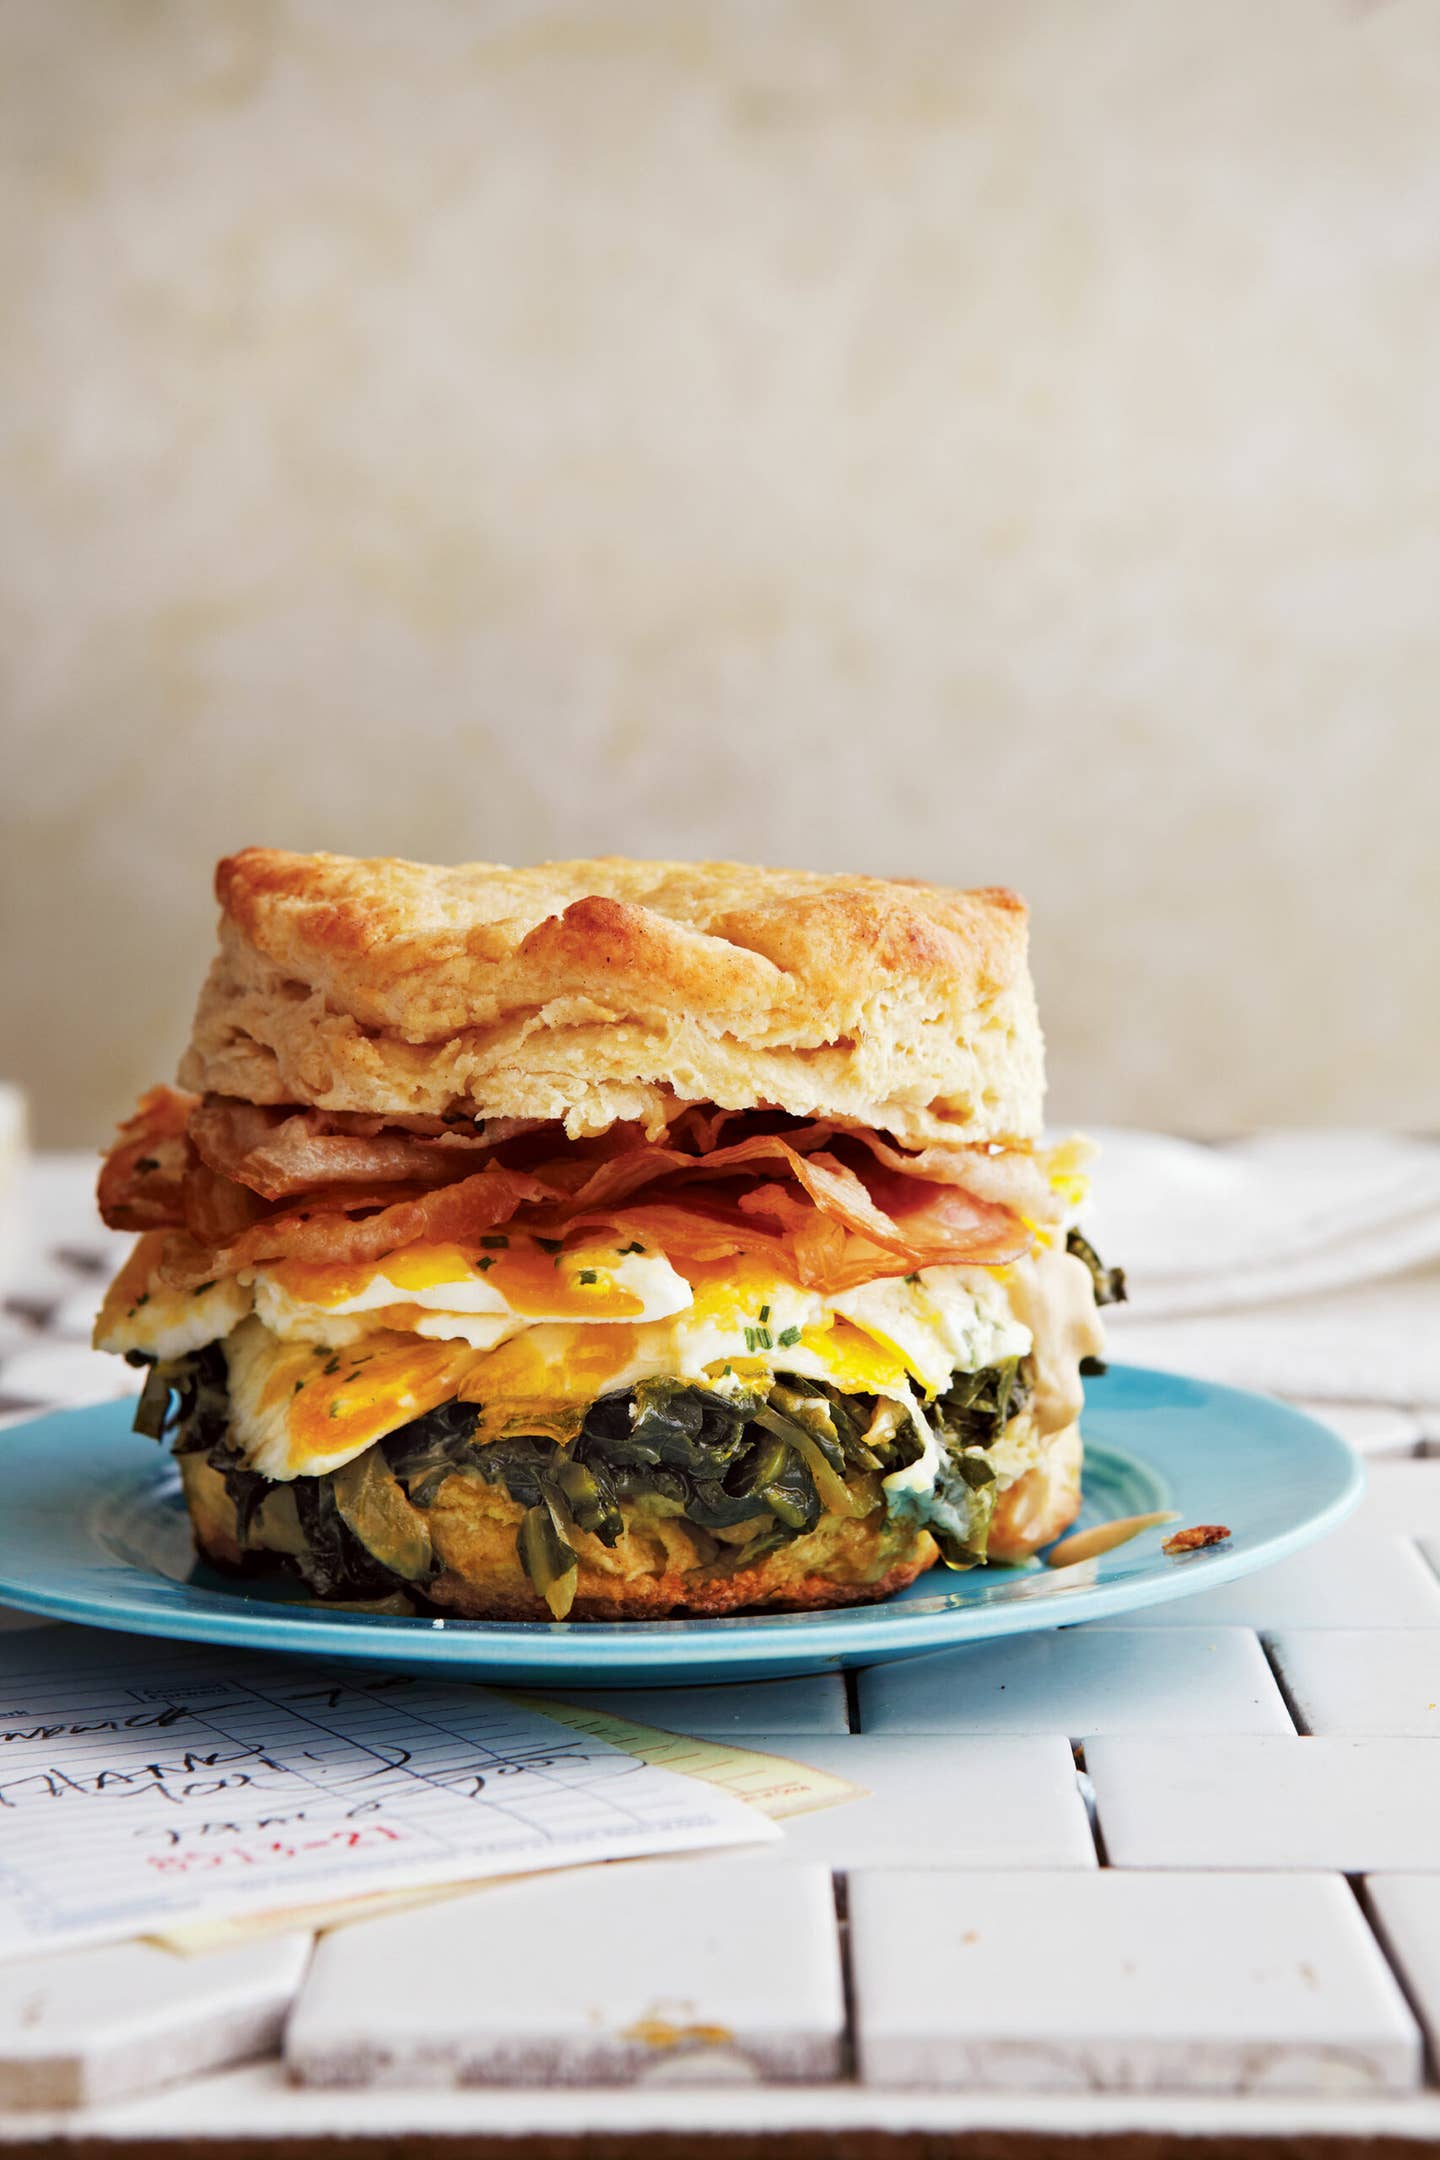 How to Win Friends and Influence People With Beautiful Breakfast Sandwiches